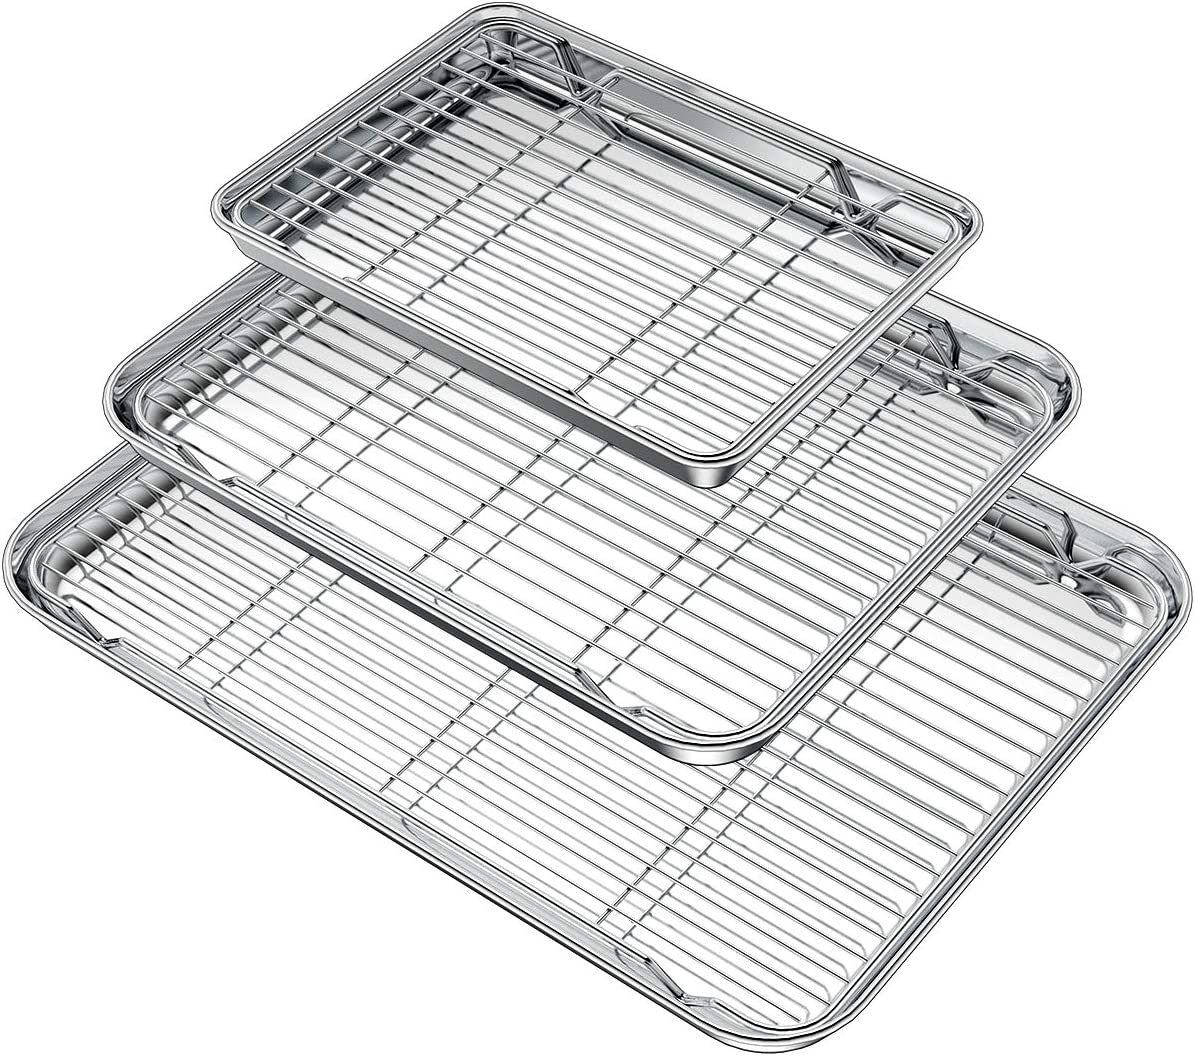 Wildone Baking Sheet & Rack Set [2 Sheets 2 Racks], Stainless Steel Cookie  Pan with Cooling Rack, Size 16 x 12 x 1 Inch, Non Toxic & Heavy Duty & Easy  Clean 